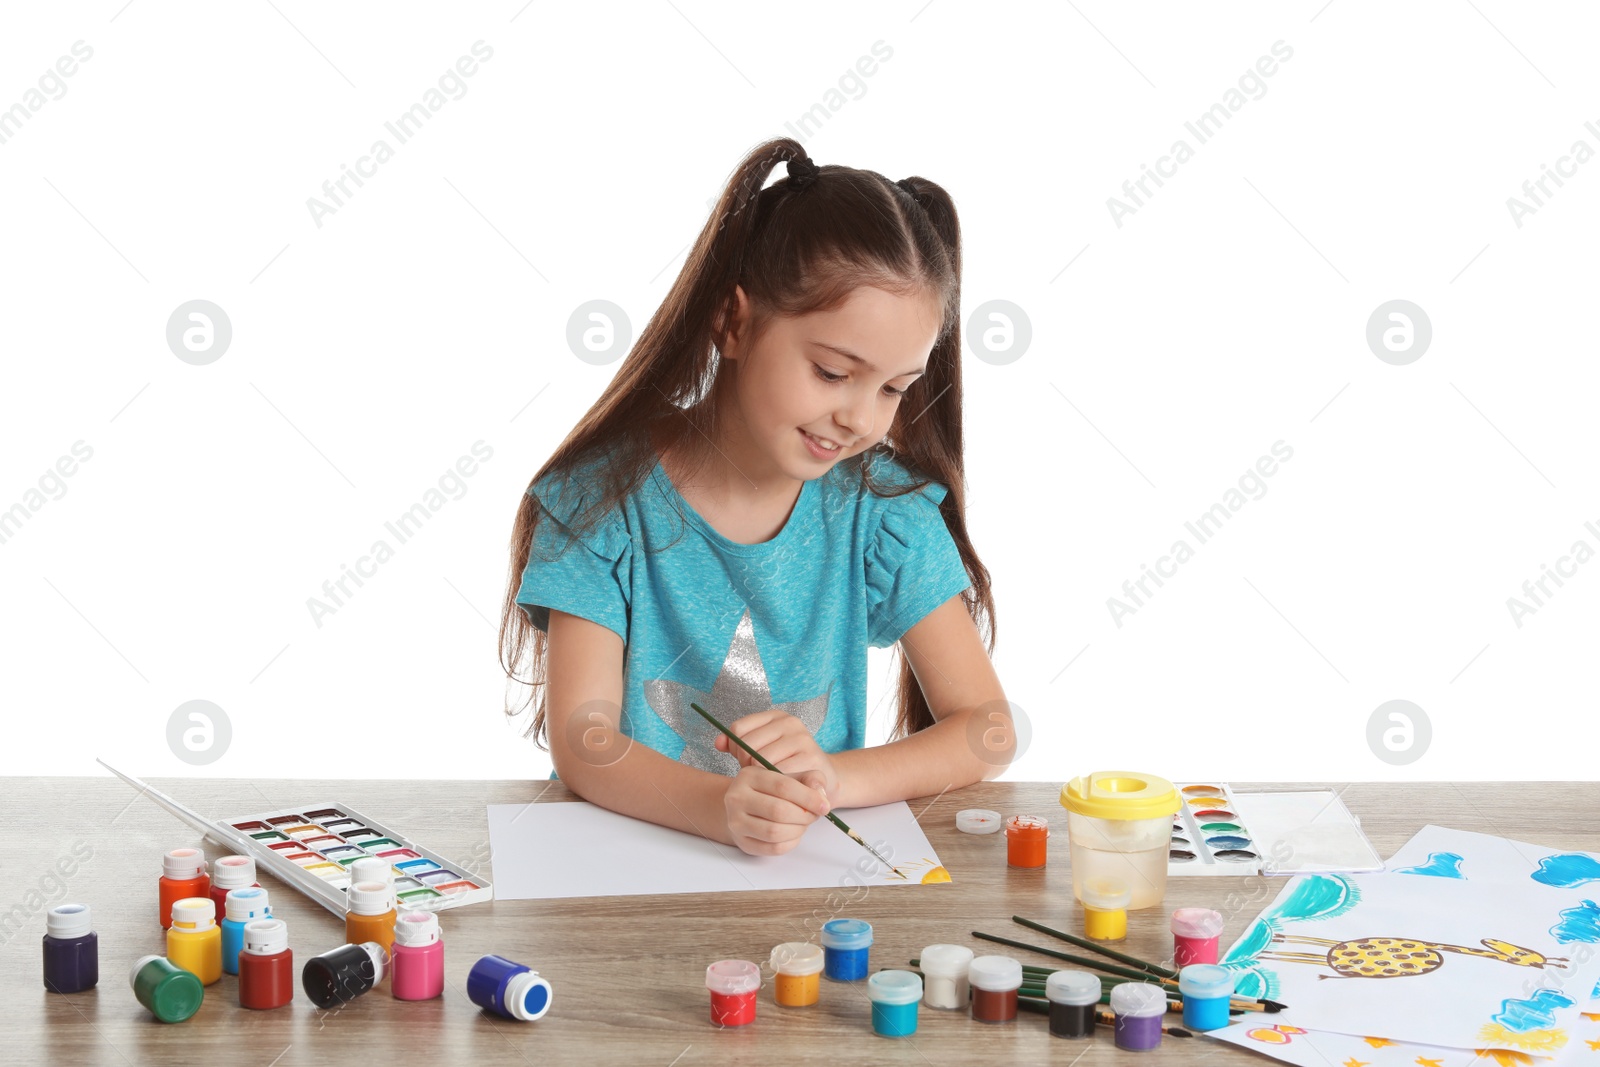 Photo of Cute child painting picture at table on white background